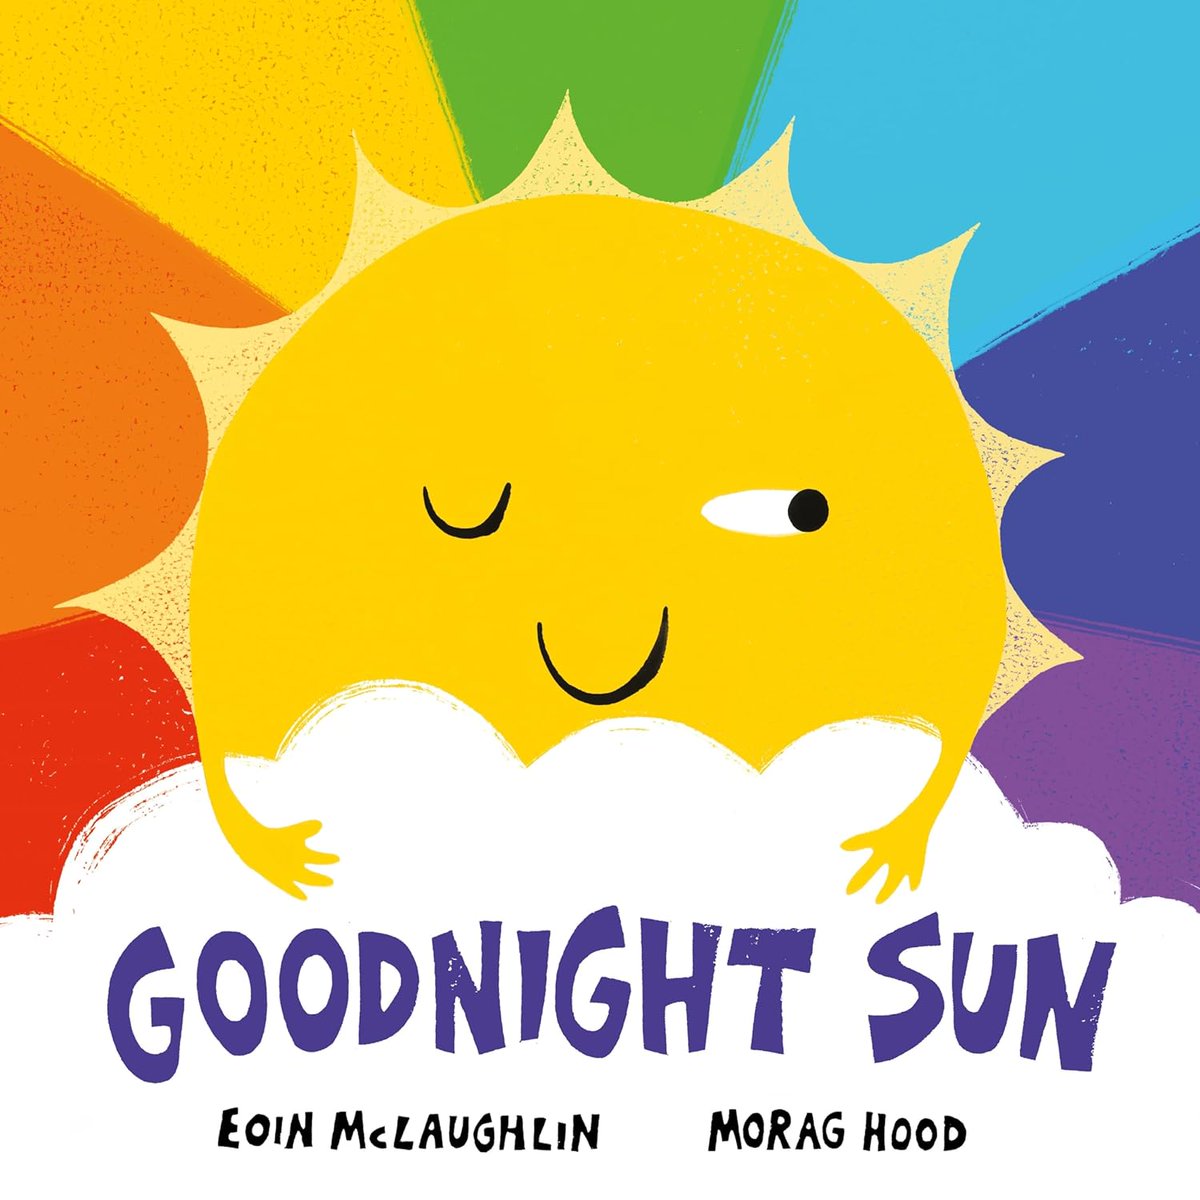 Little ones will love @eoinmclaughlin & @MoragHood’s #GoodnightSun a fun & vibrant picture book that imagines a cheeky sun who won’t sleep! @toor_simi @FaberChildrens  pamnorfolkblog.blogspot.com Review also @leponline later this week!